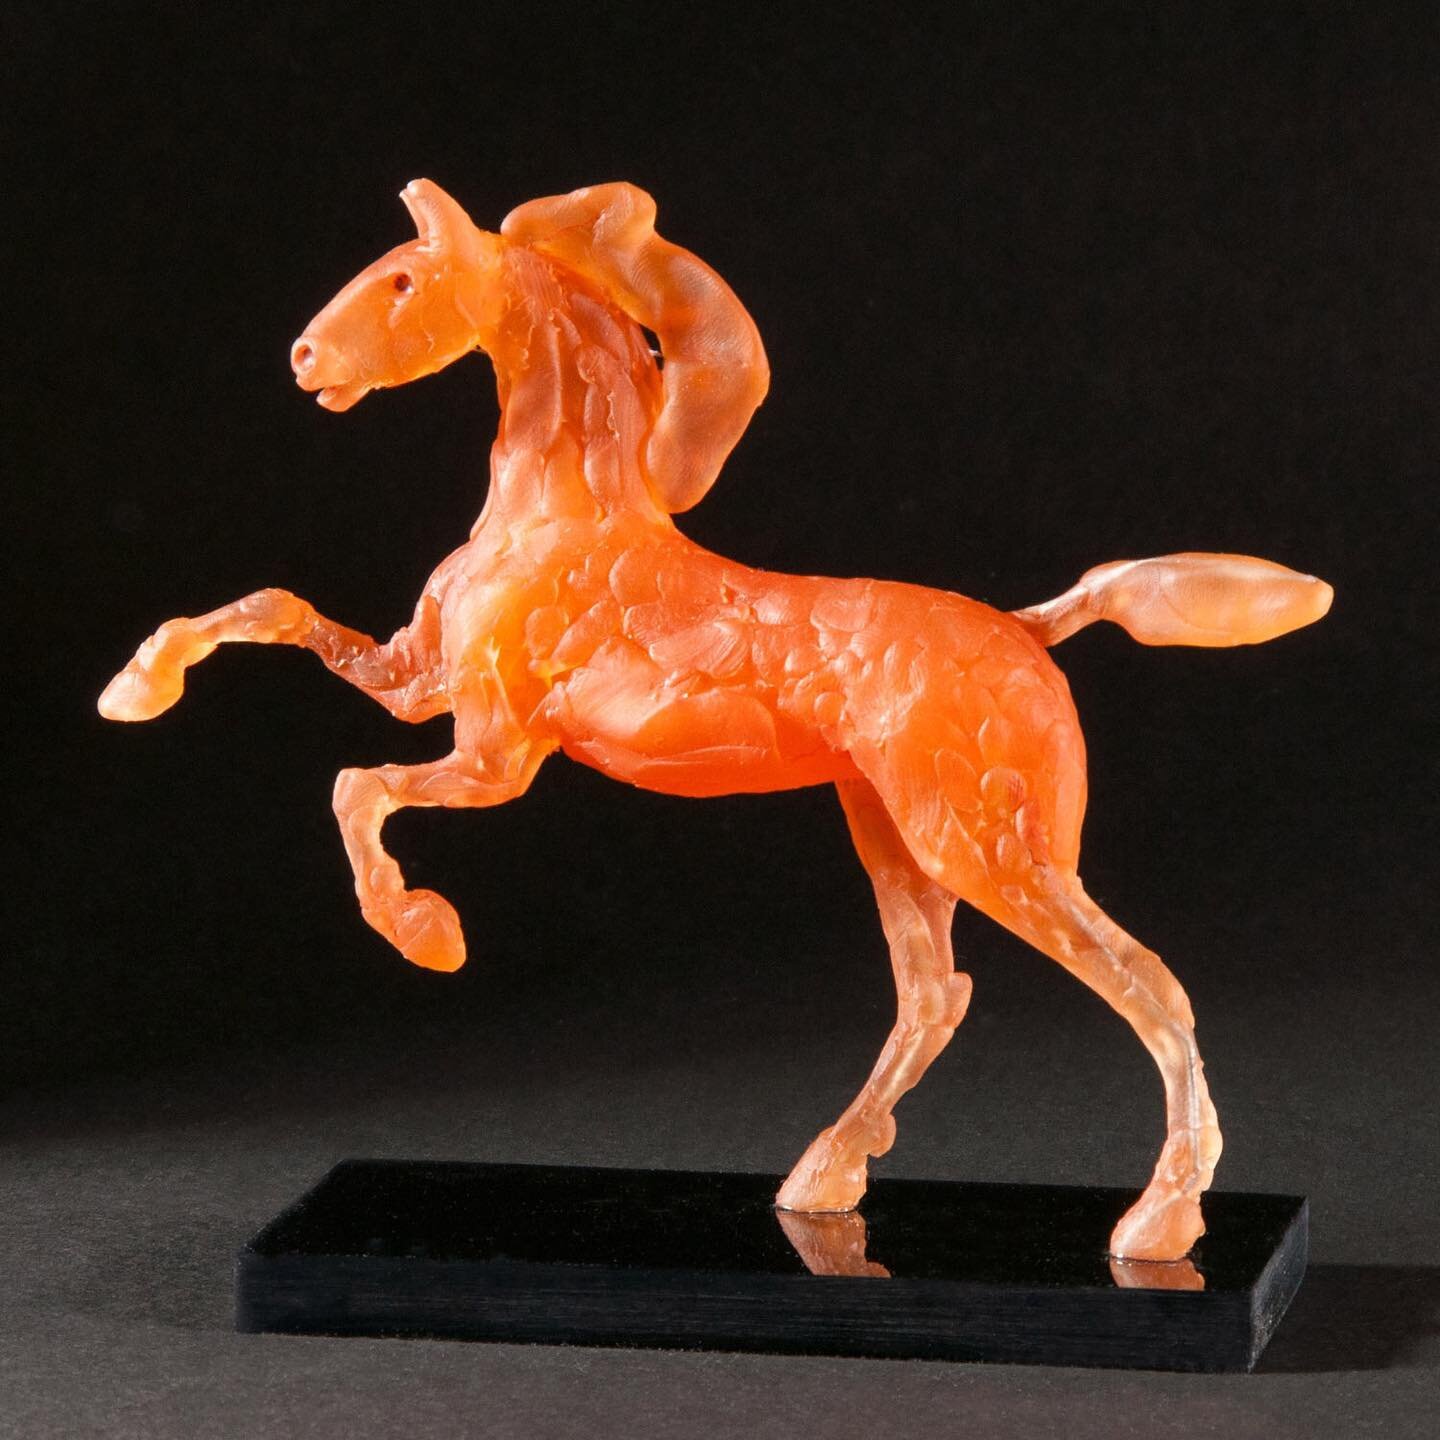 Chestnut Horse! A lively and vibrant little horse galloping through our world. The Chestnut Horse is one of my series of brightly-coloured running horses, made of a beautiful semi-translucent contemporary British Eco-resin. It measures 16cm long x 13